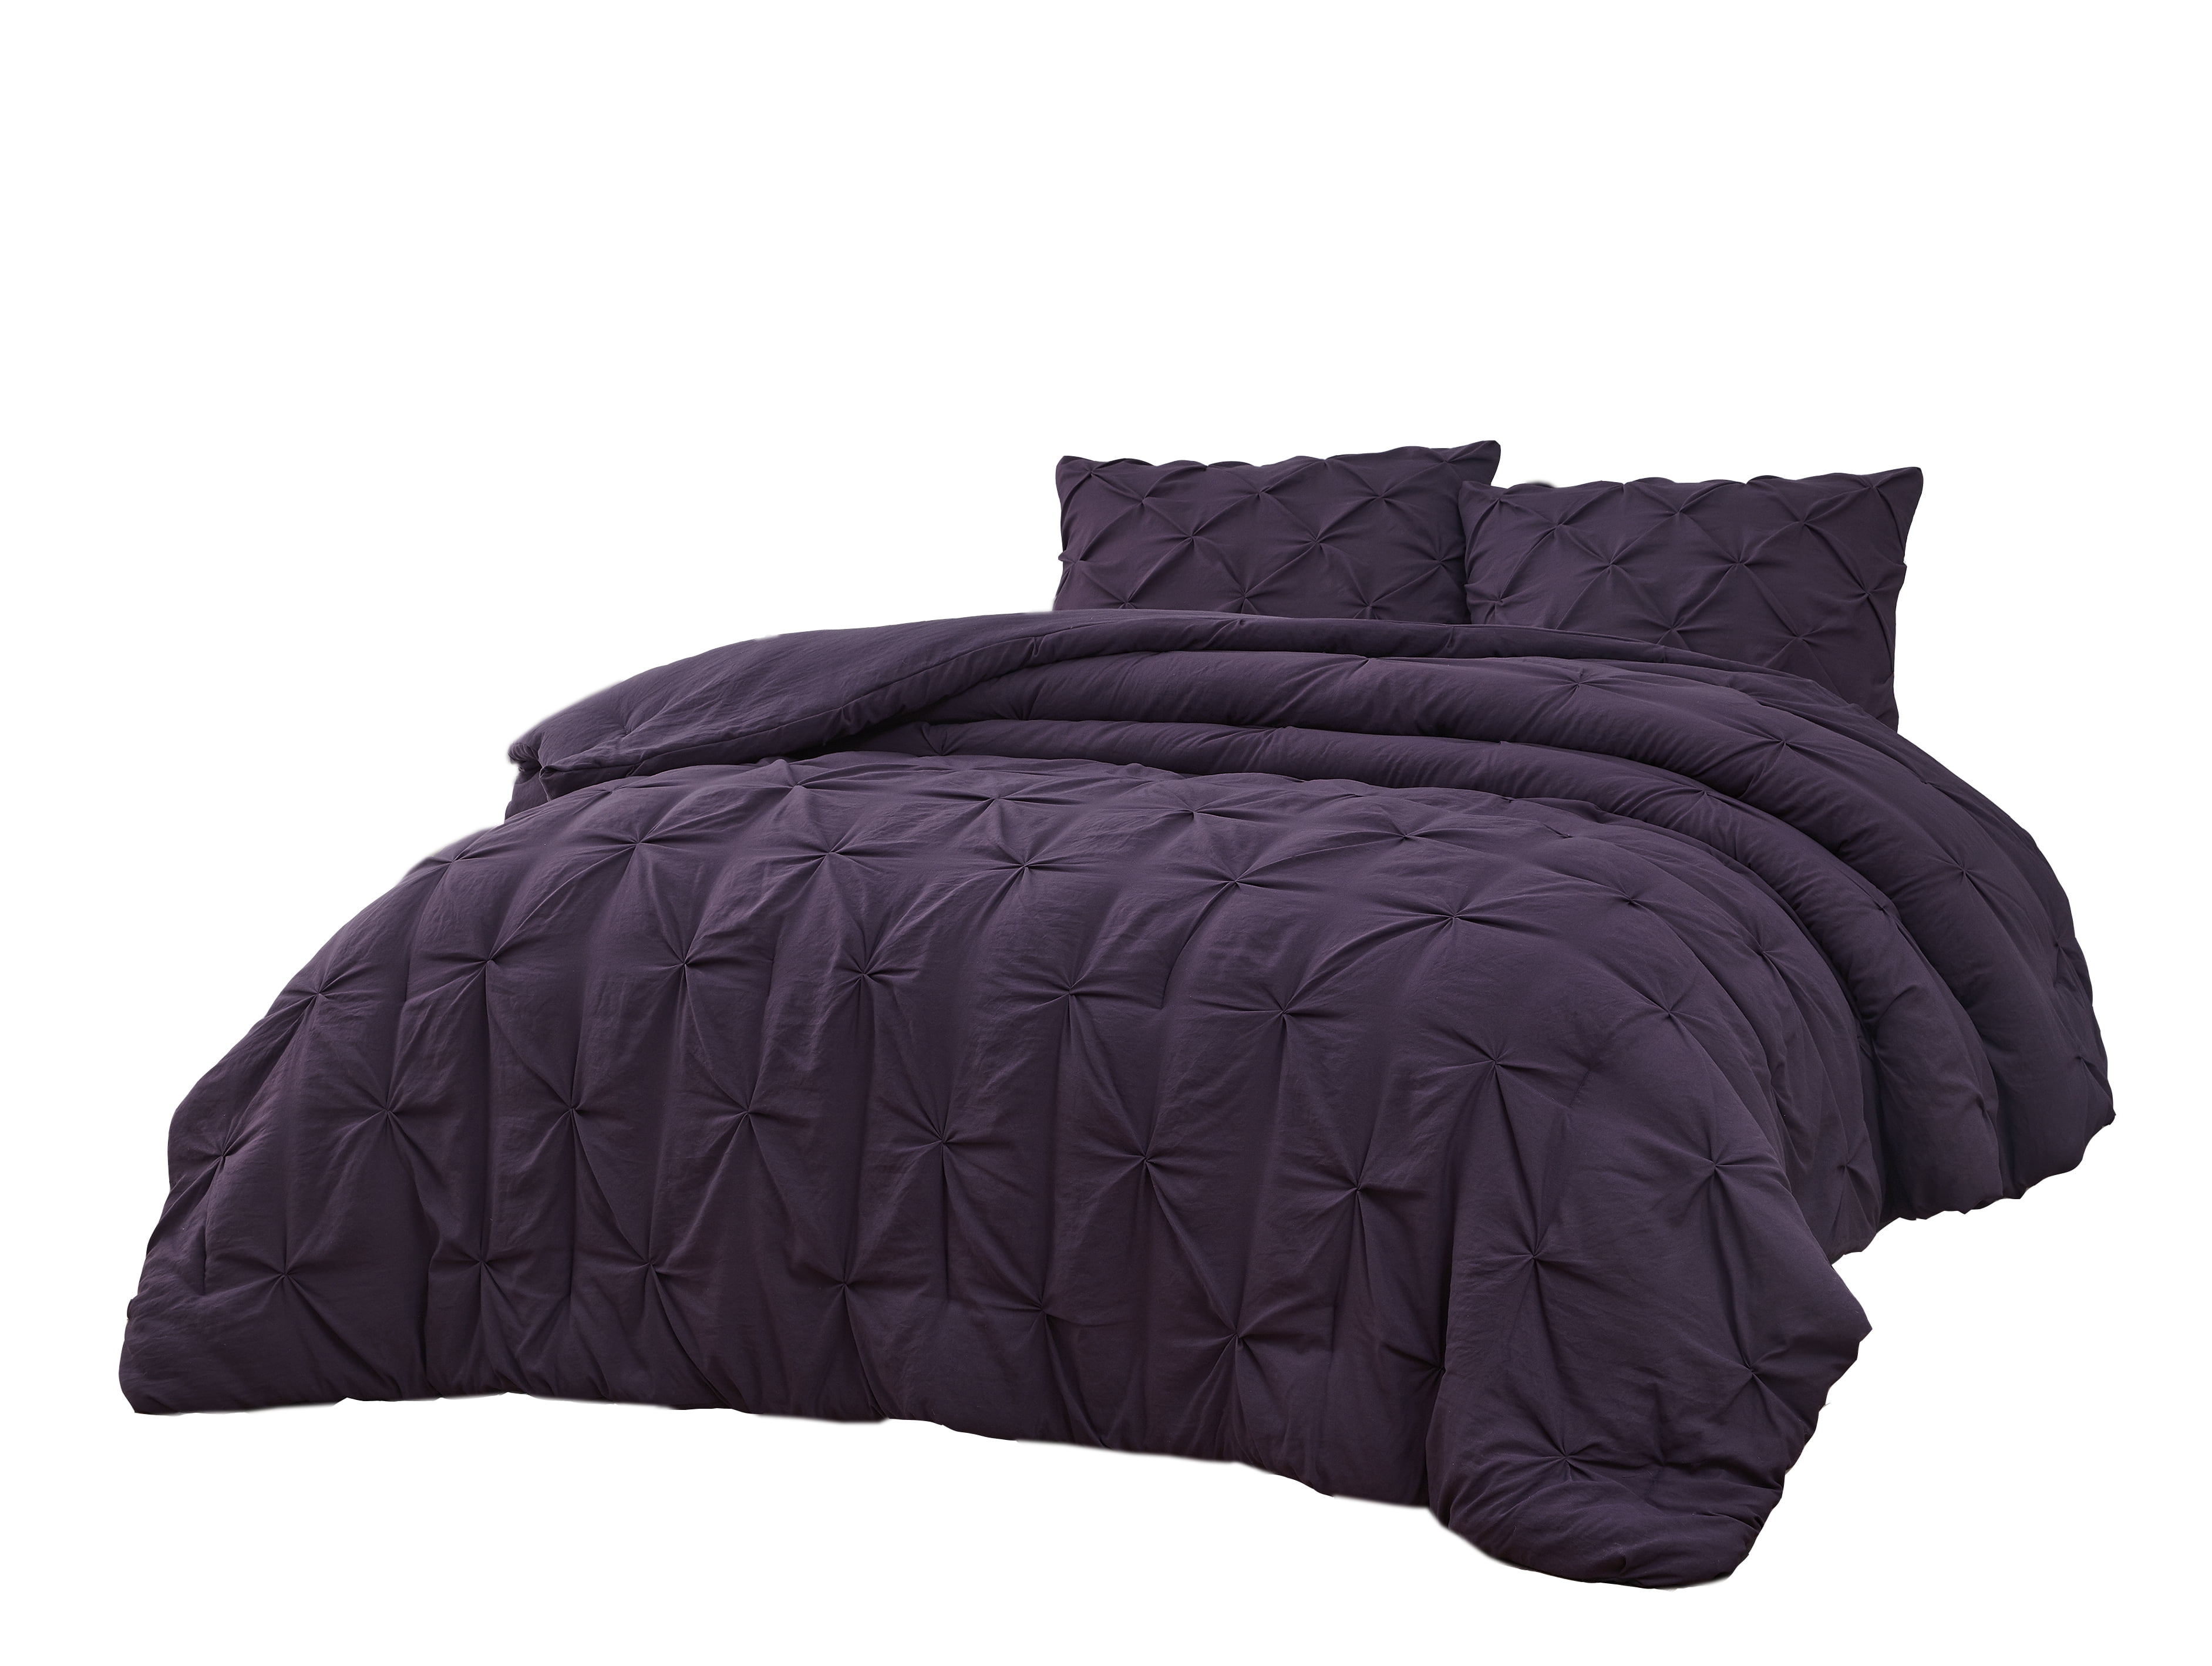 Mari 3pc Comforter Set Stonewashed, Purple Bed In A Bag Queen Size